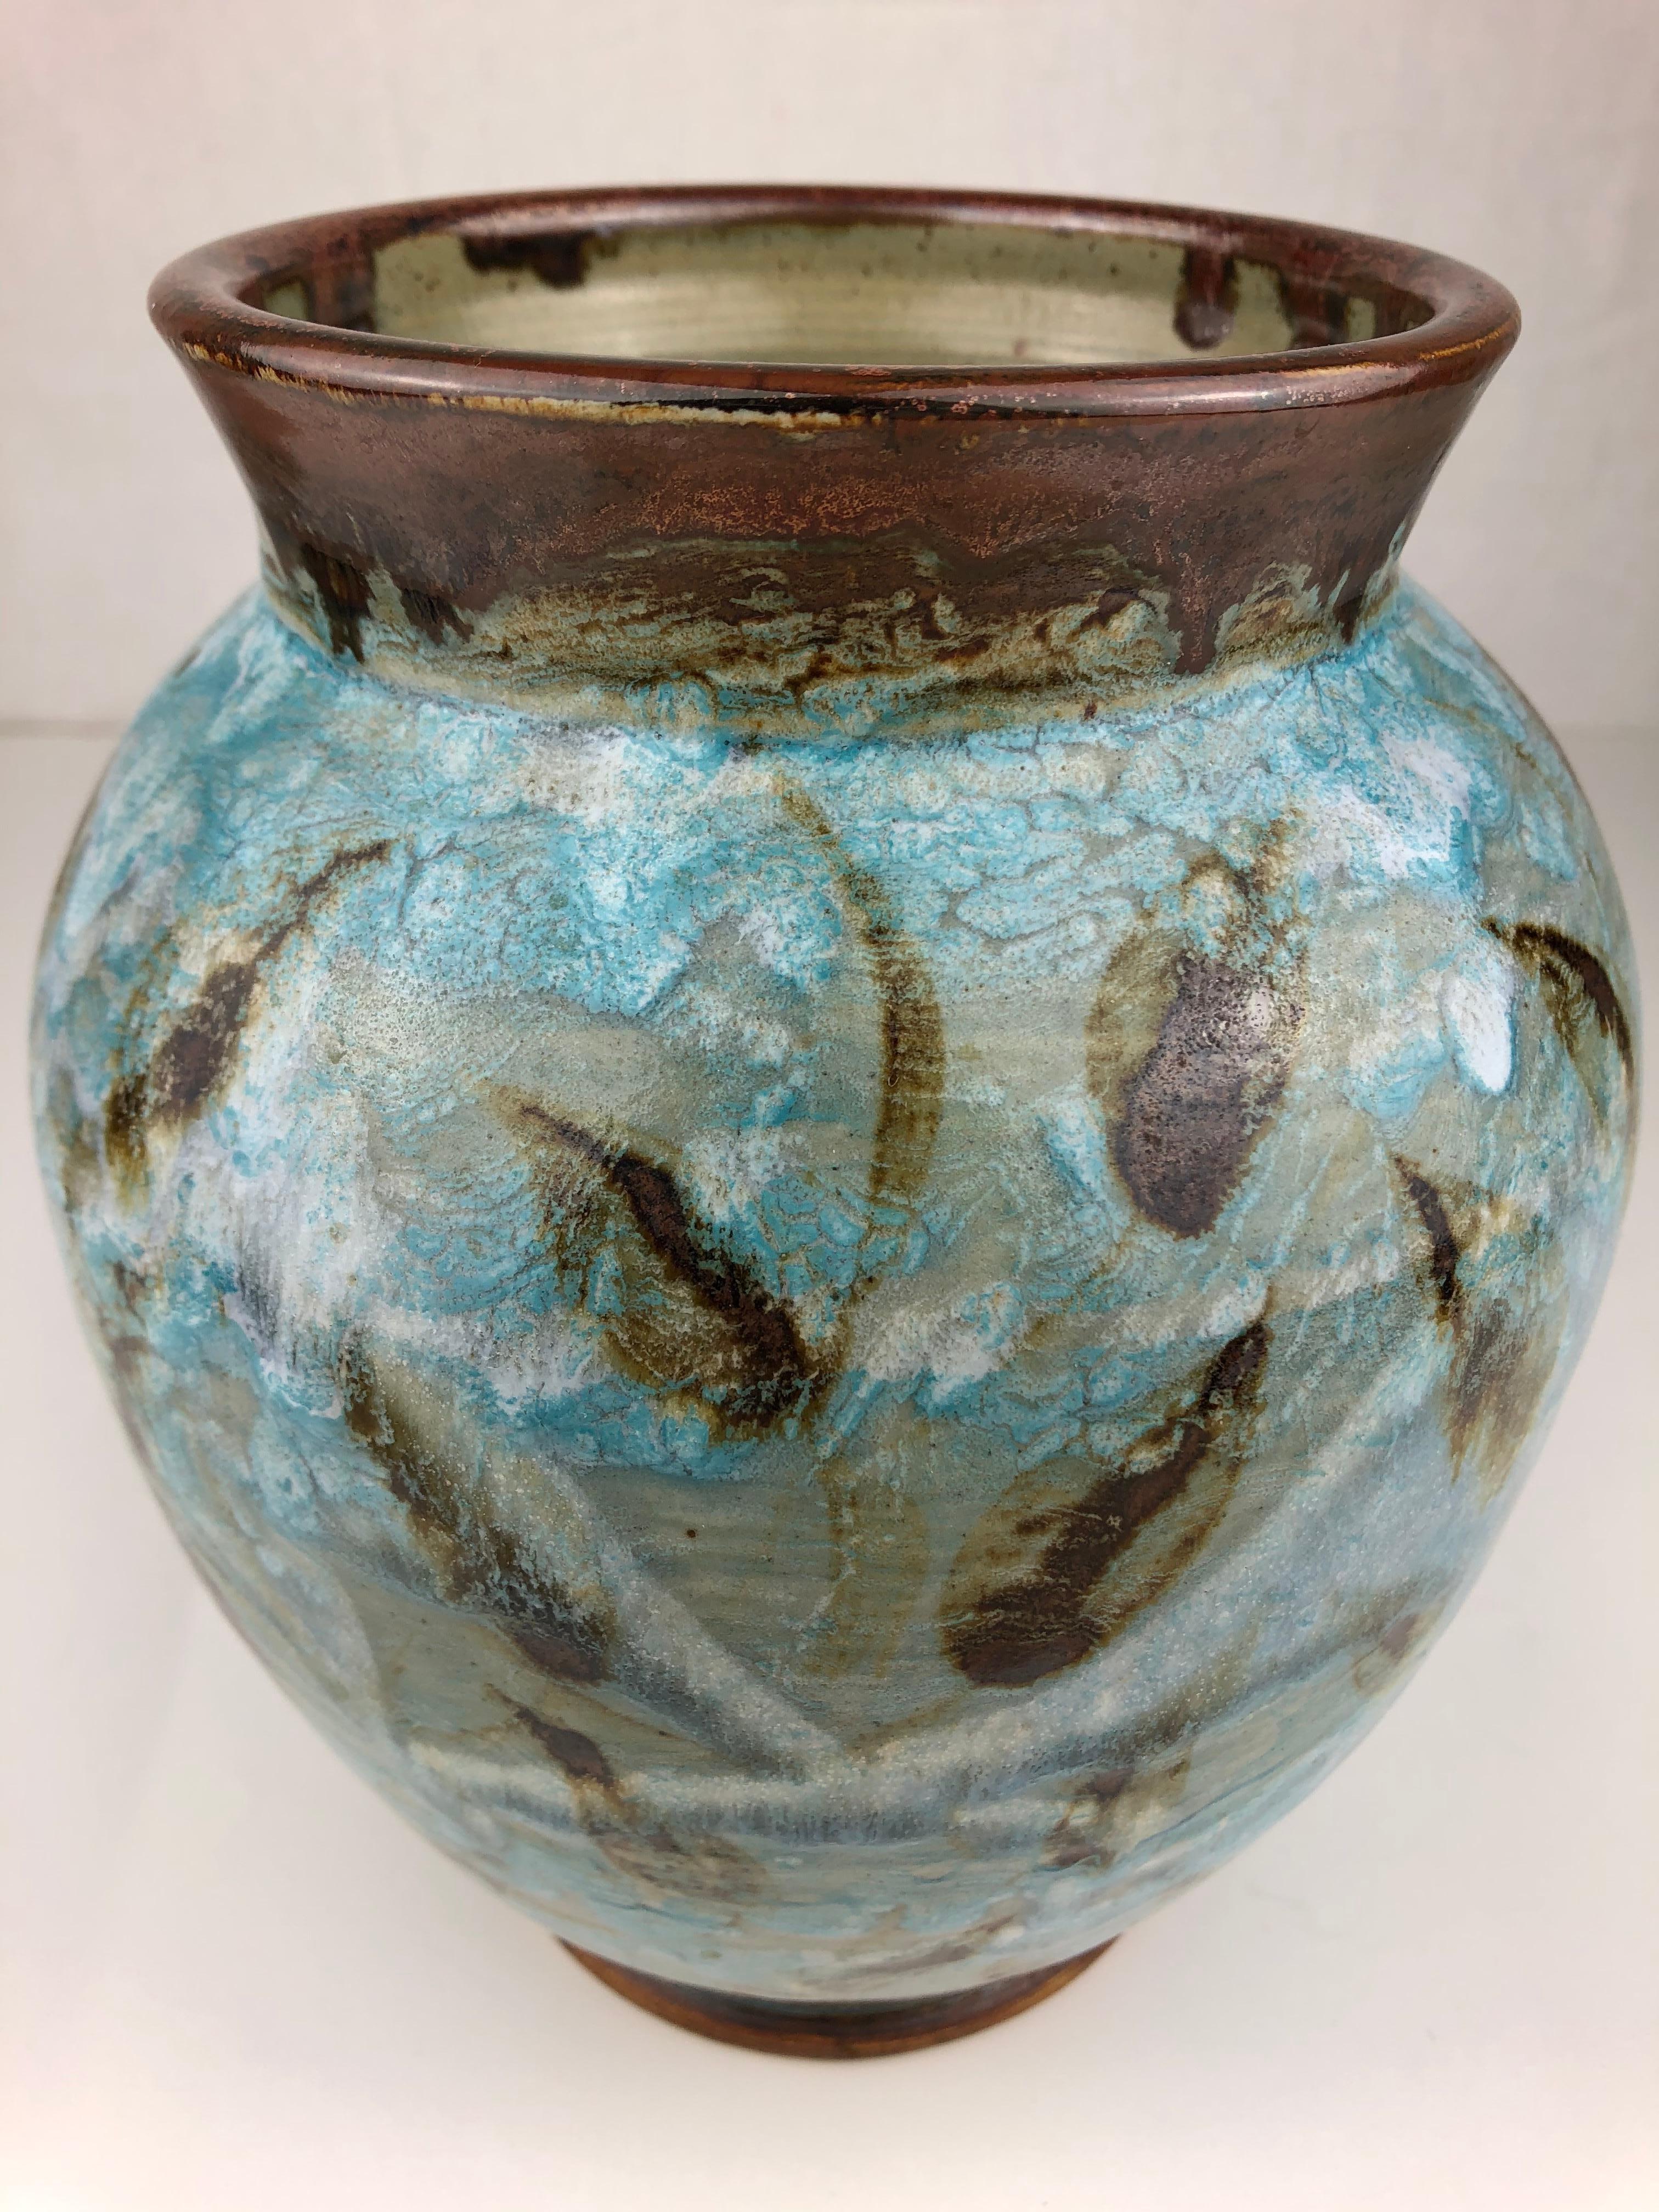 This dazzling glazed ceramic vase was handcrafted in France, circa 1980-1990 by Gerard Rappa. The mixture of colors are truly beautiful and the aquatic plants add to the charm.  

It can enhance any shelf, table, credenza or countertop as it is